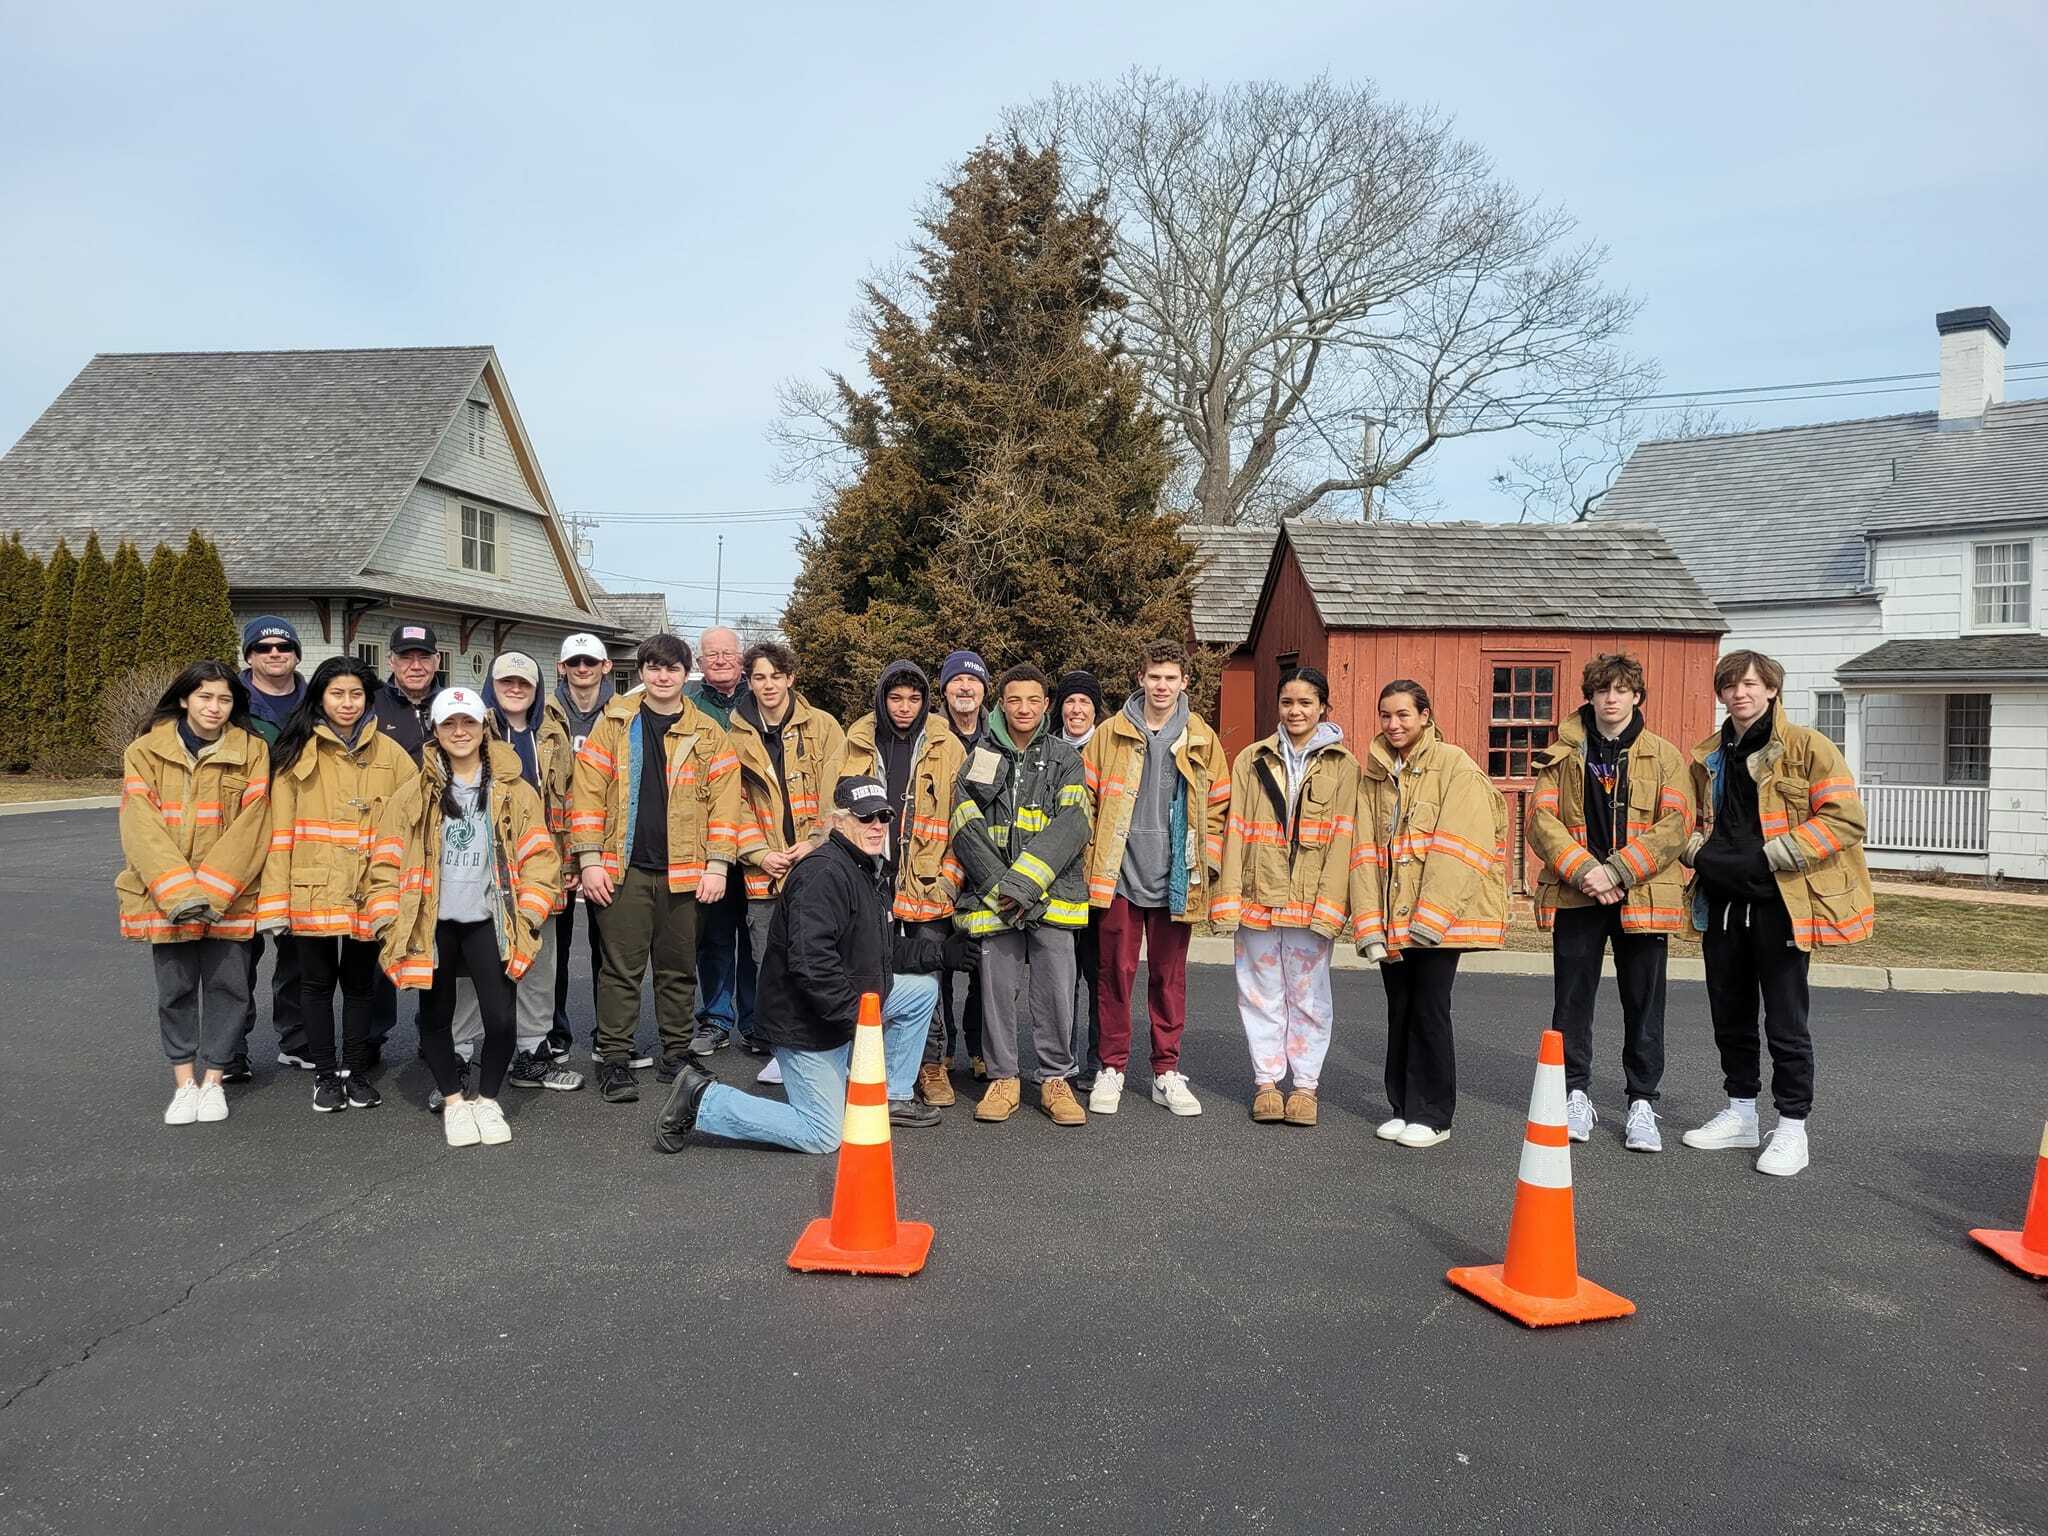 The Westhampton Beach Fire Department Juniors held a drive last Saturday for articles needed in Ukraine. The community came out and we were over whelmed with their support of donations and monetary gifts, said Cody Hoyle.